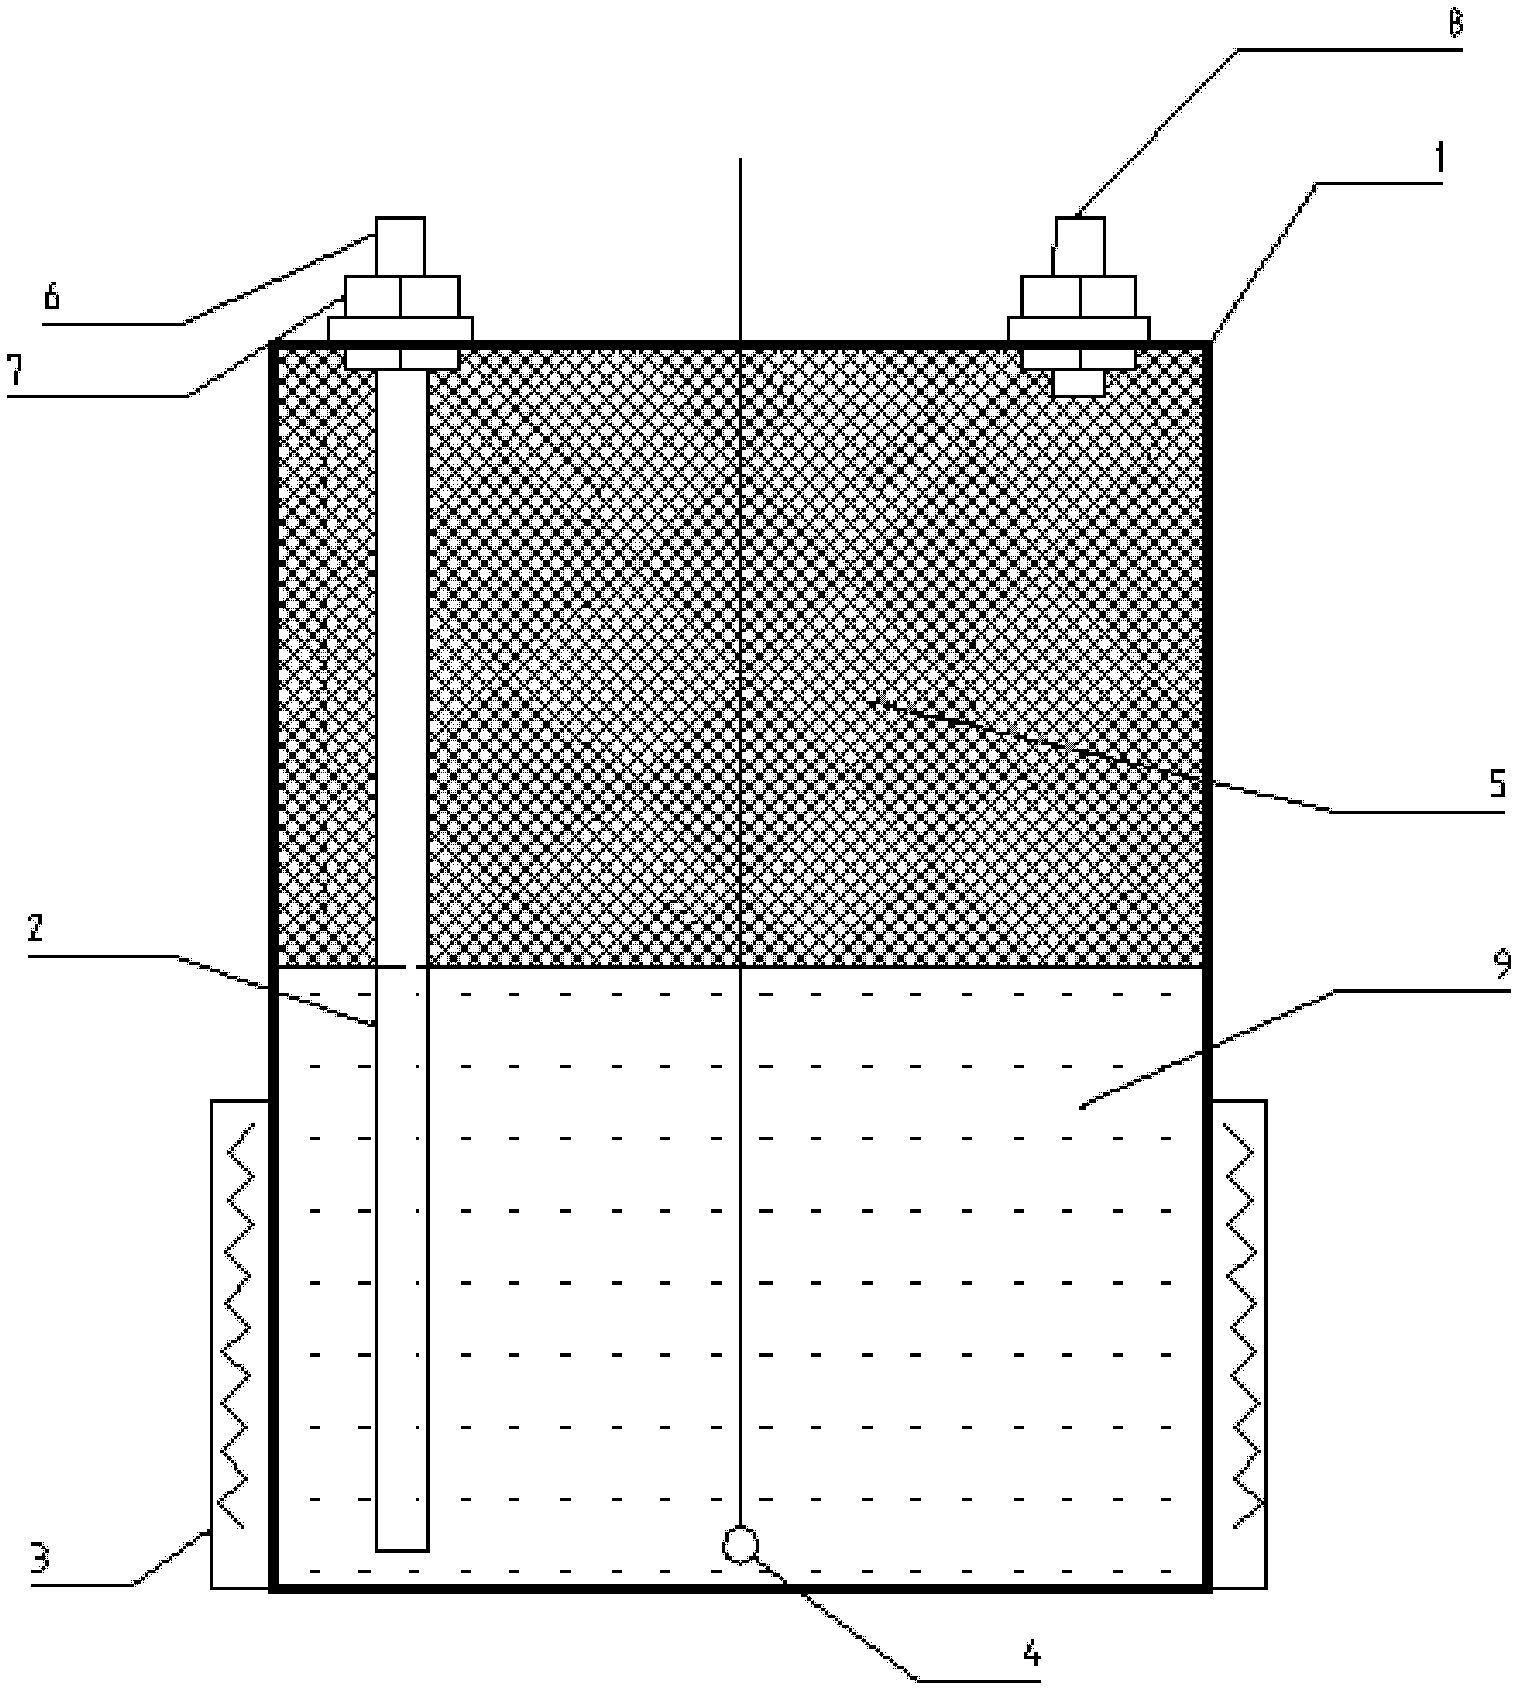 Reaction gas humidifier for proton exchange membrane fuel cell